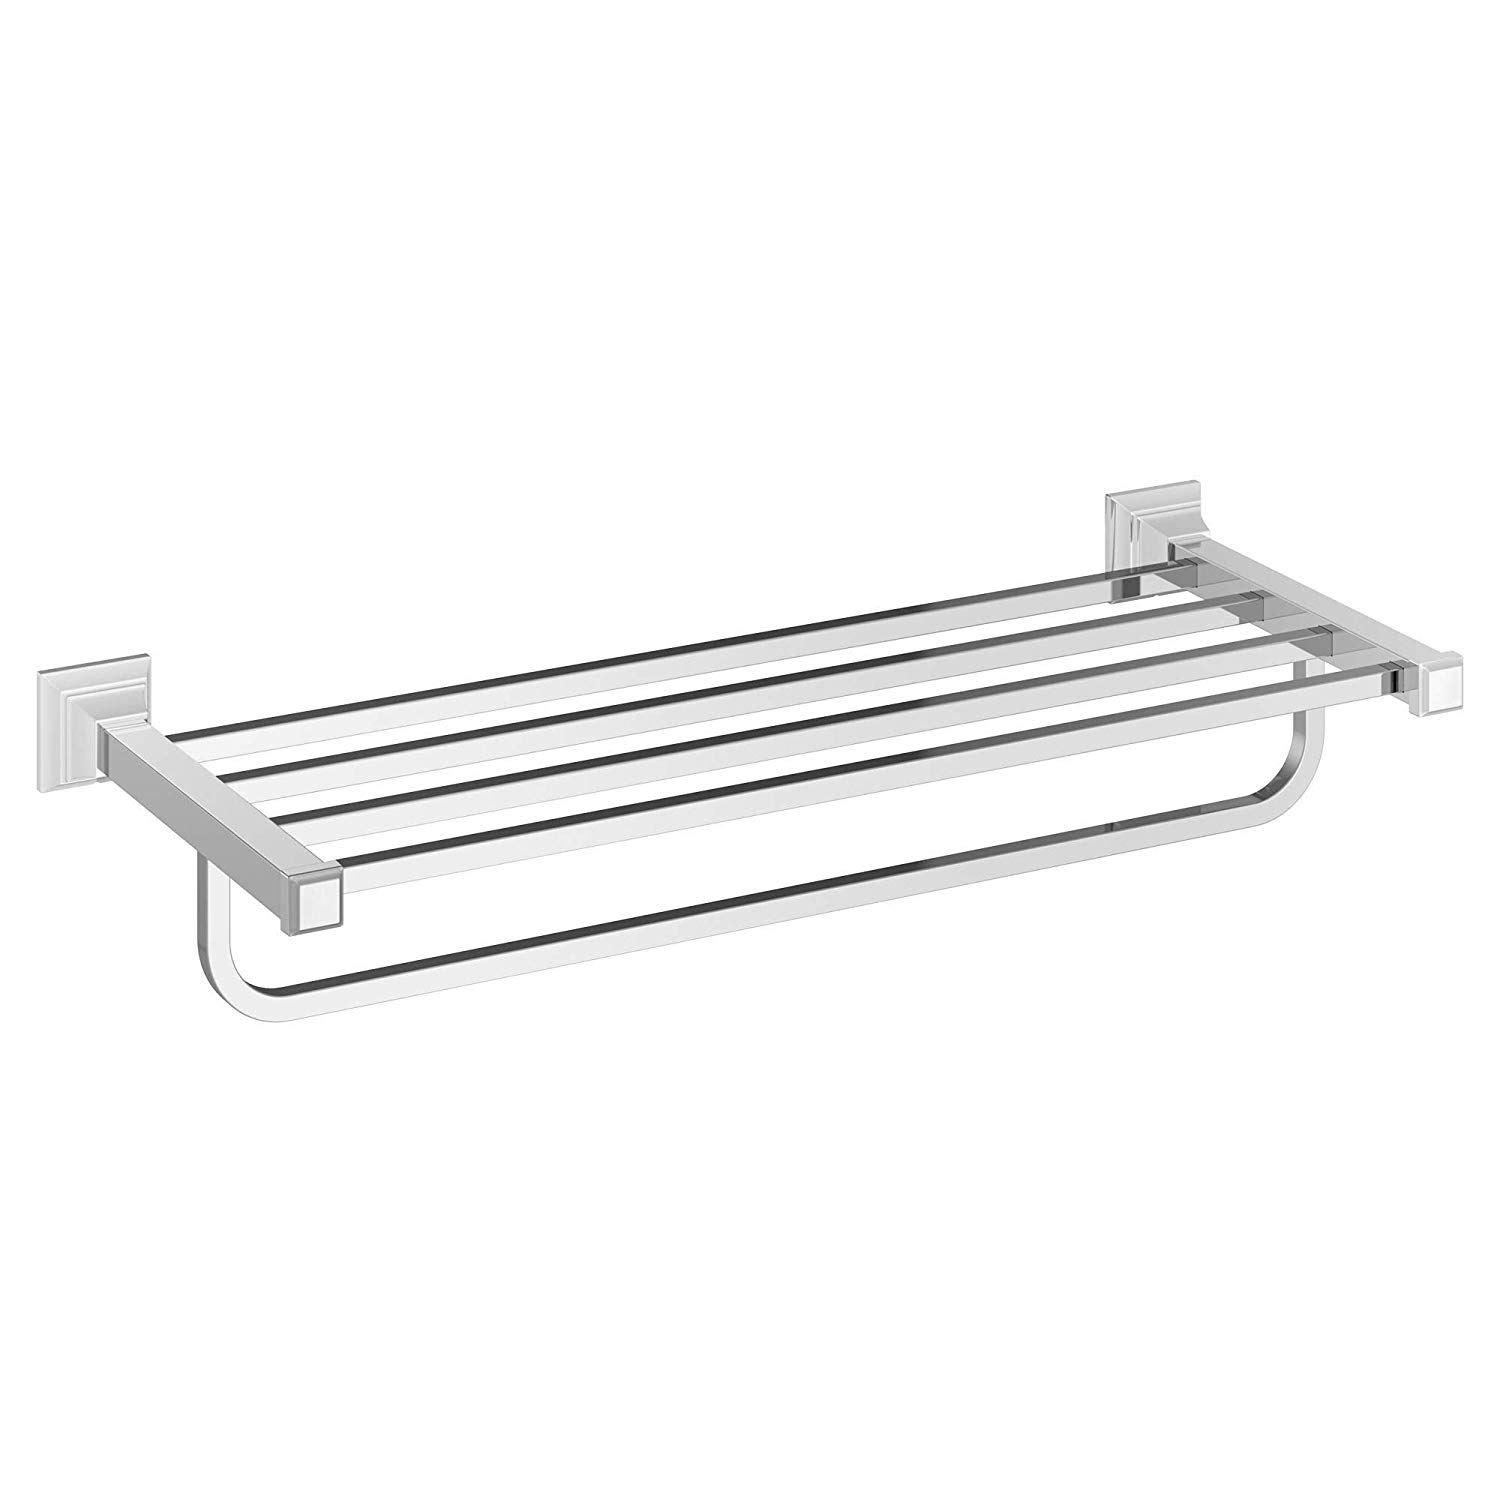 TRAIN RACK 24in 7455.260.002 PC TOWN SQUARE S